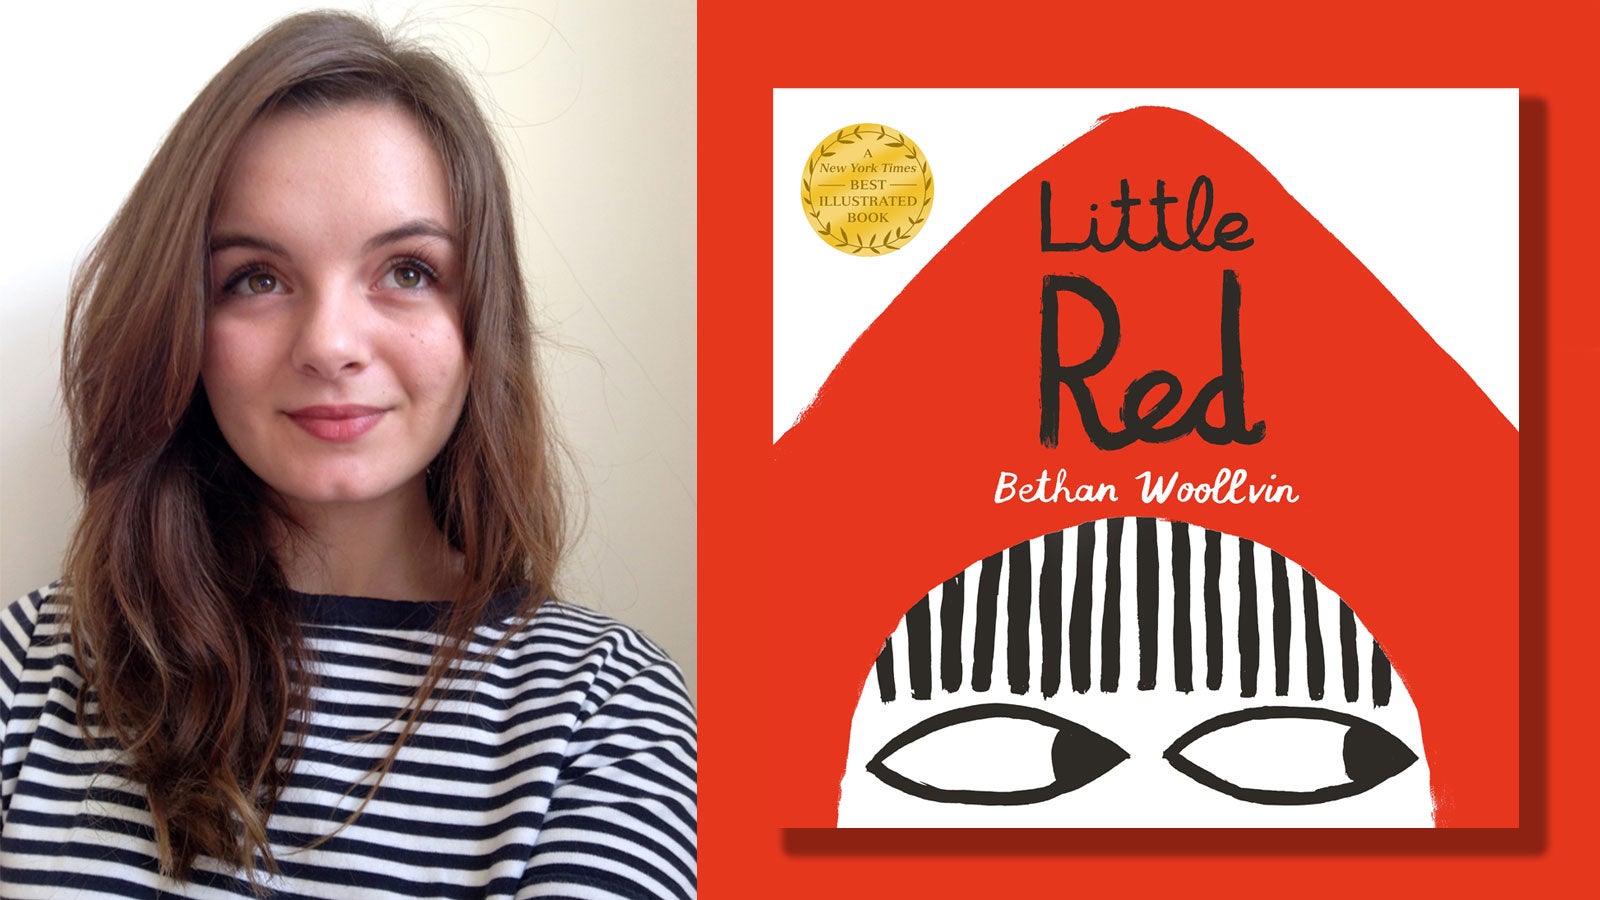 A photograph of Bthan Woollvin next to the cover of her book Little Red